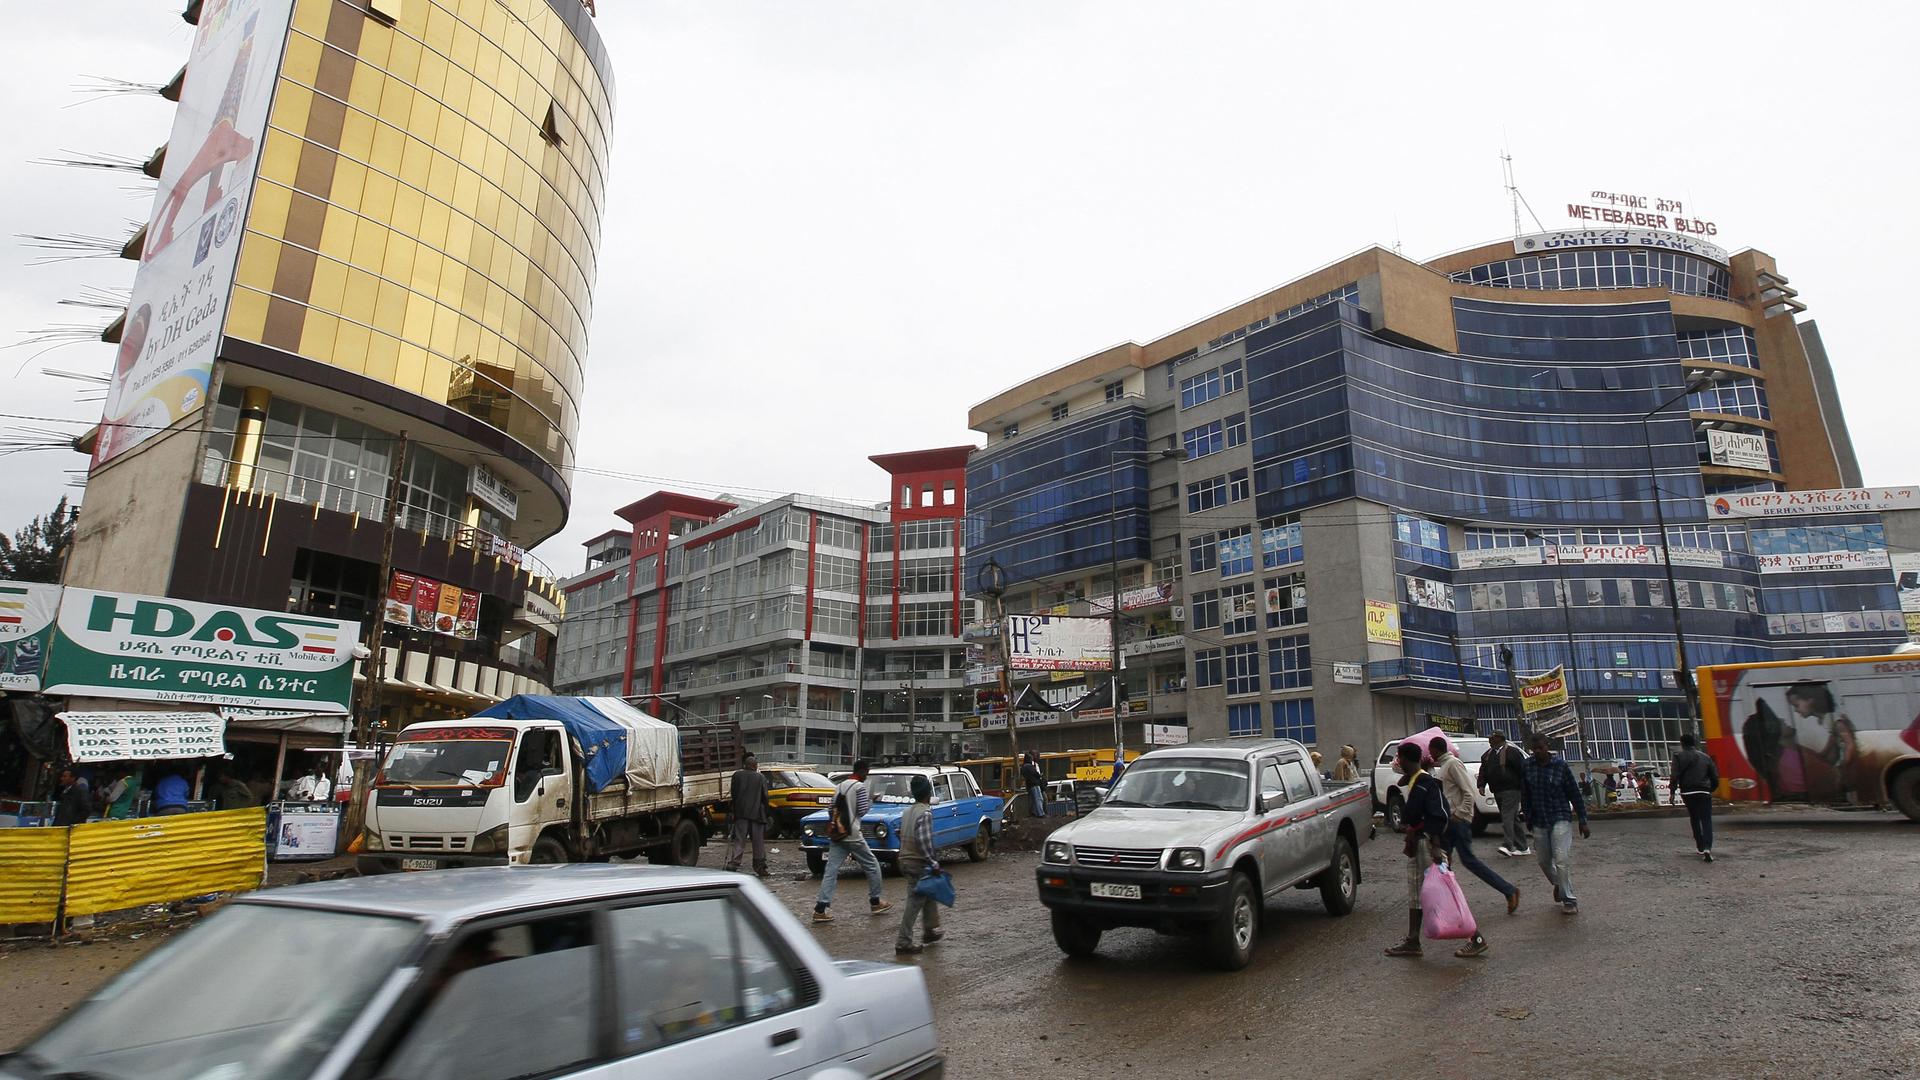 People walk through the streets of a shopping area in Addis Ababa.